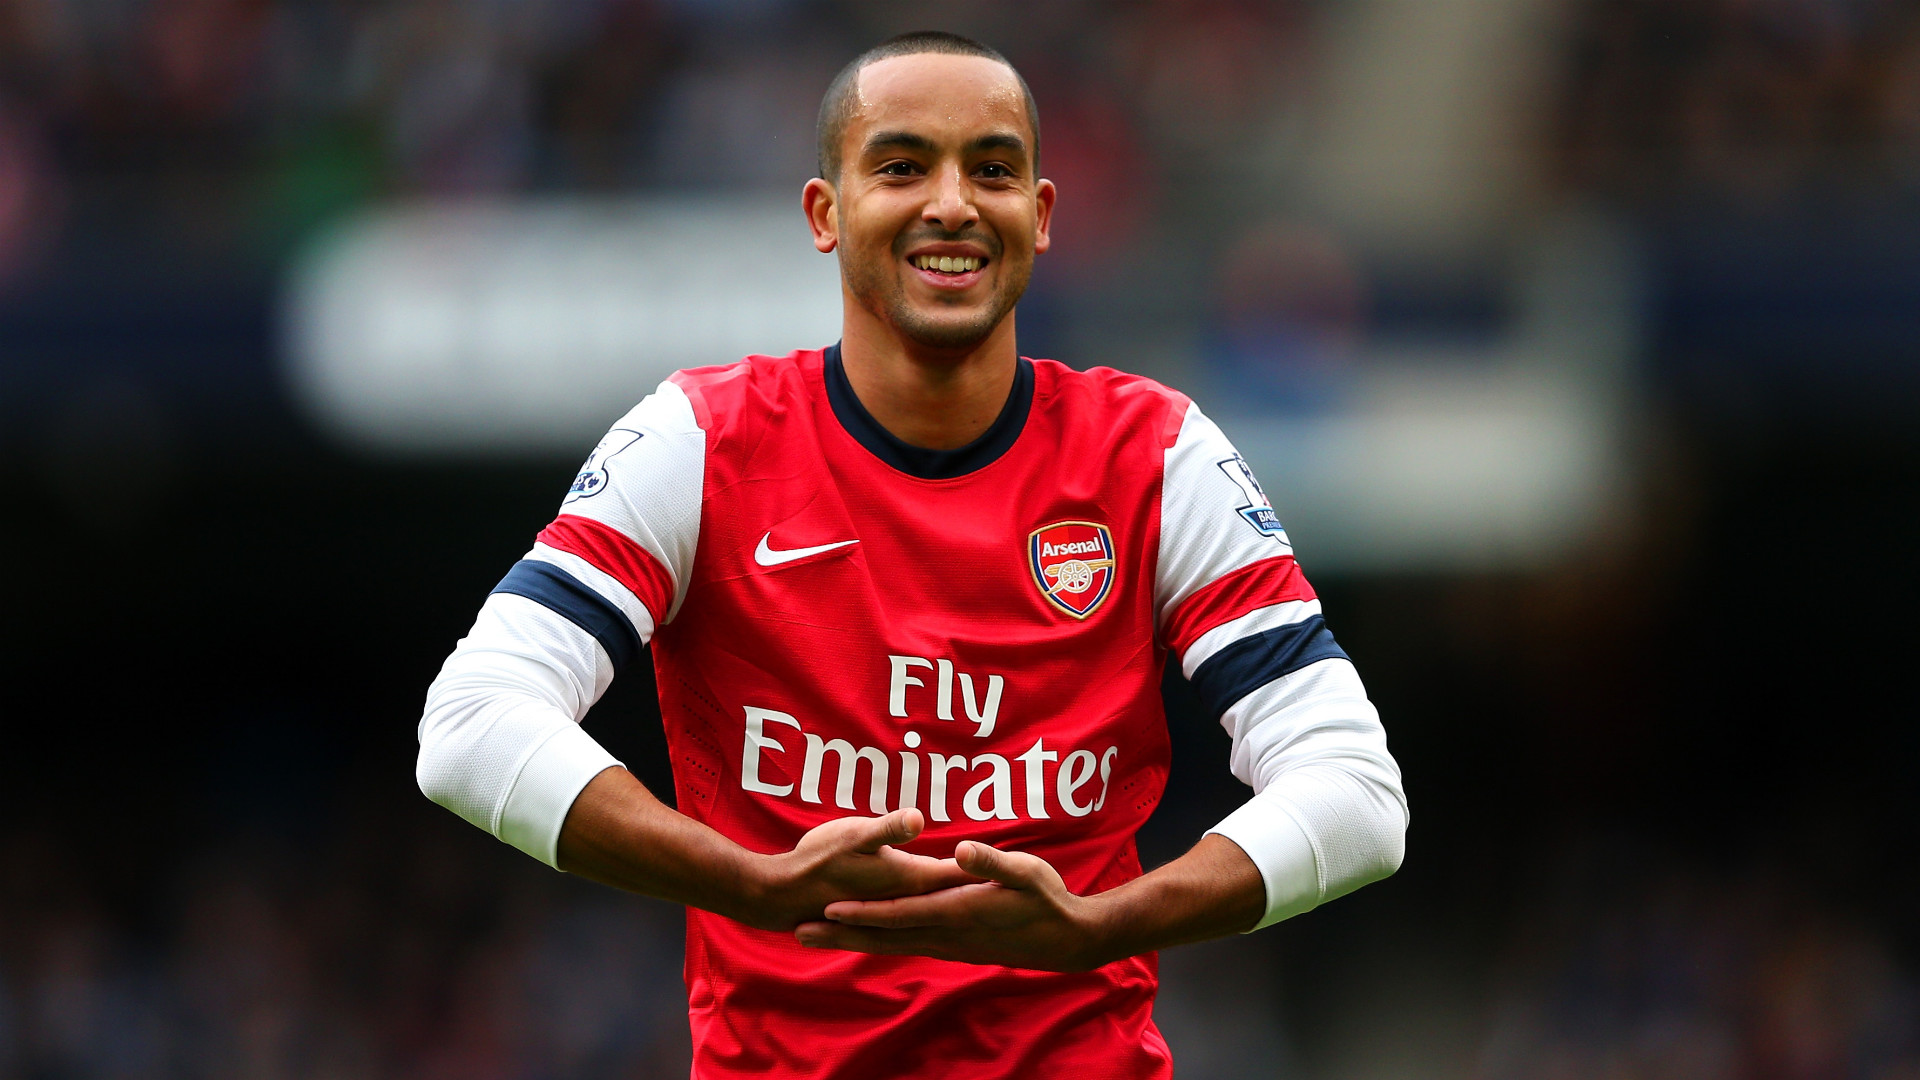 'Chelsea came in, so did Liverpool' - Walcott reveals deciding factor in Arsenal move